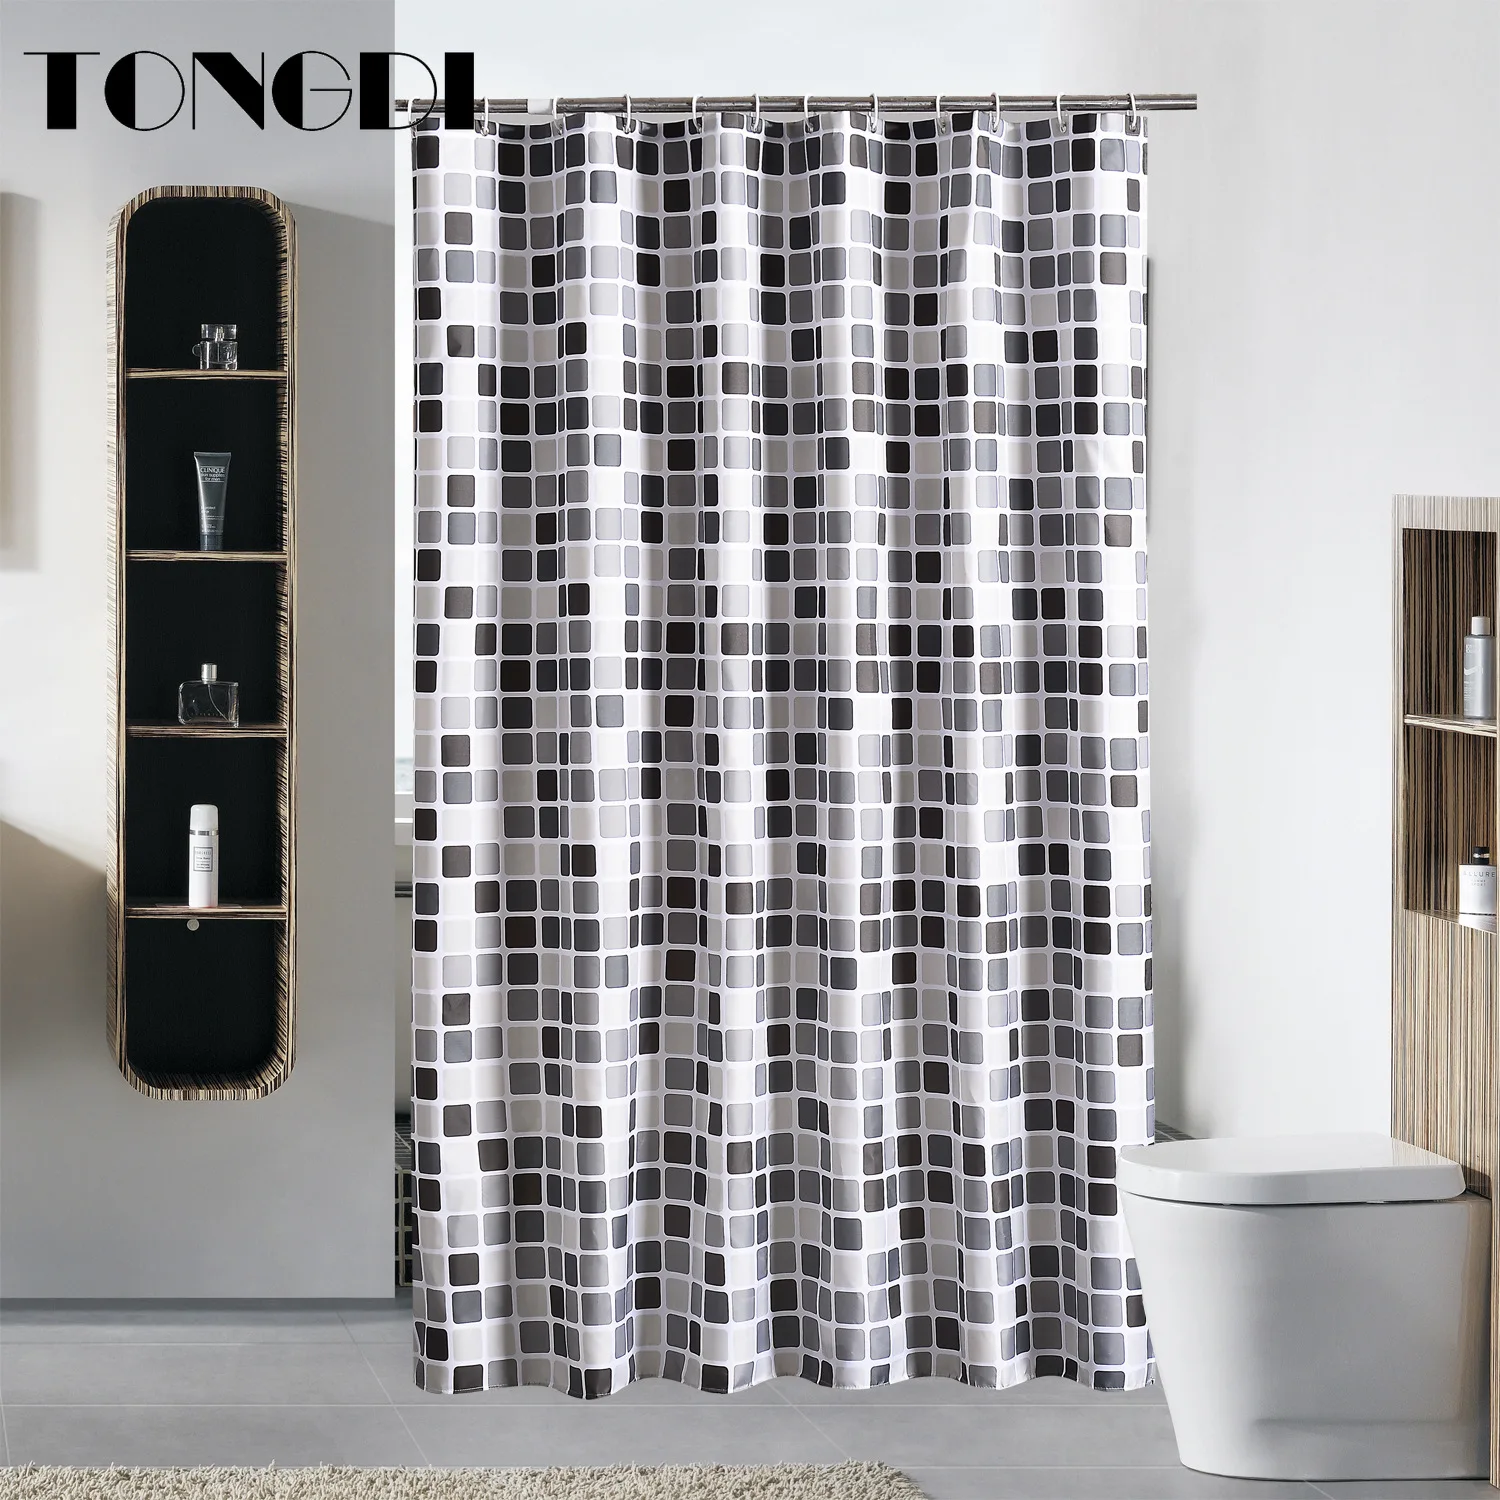 

TONGDI Shower Curtain Waterproof Eco-friend Mediterranean Plaid Quick-drying Print Purity For Bathroom Washroom Home Polyester